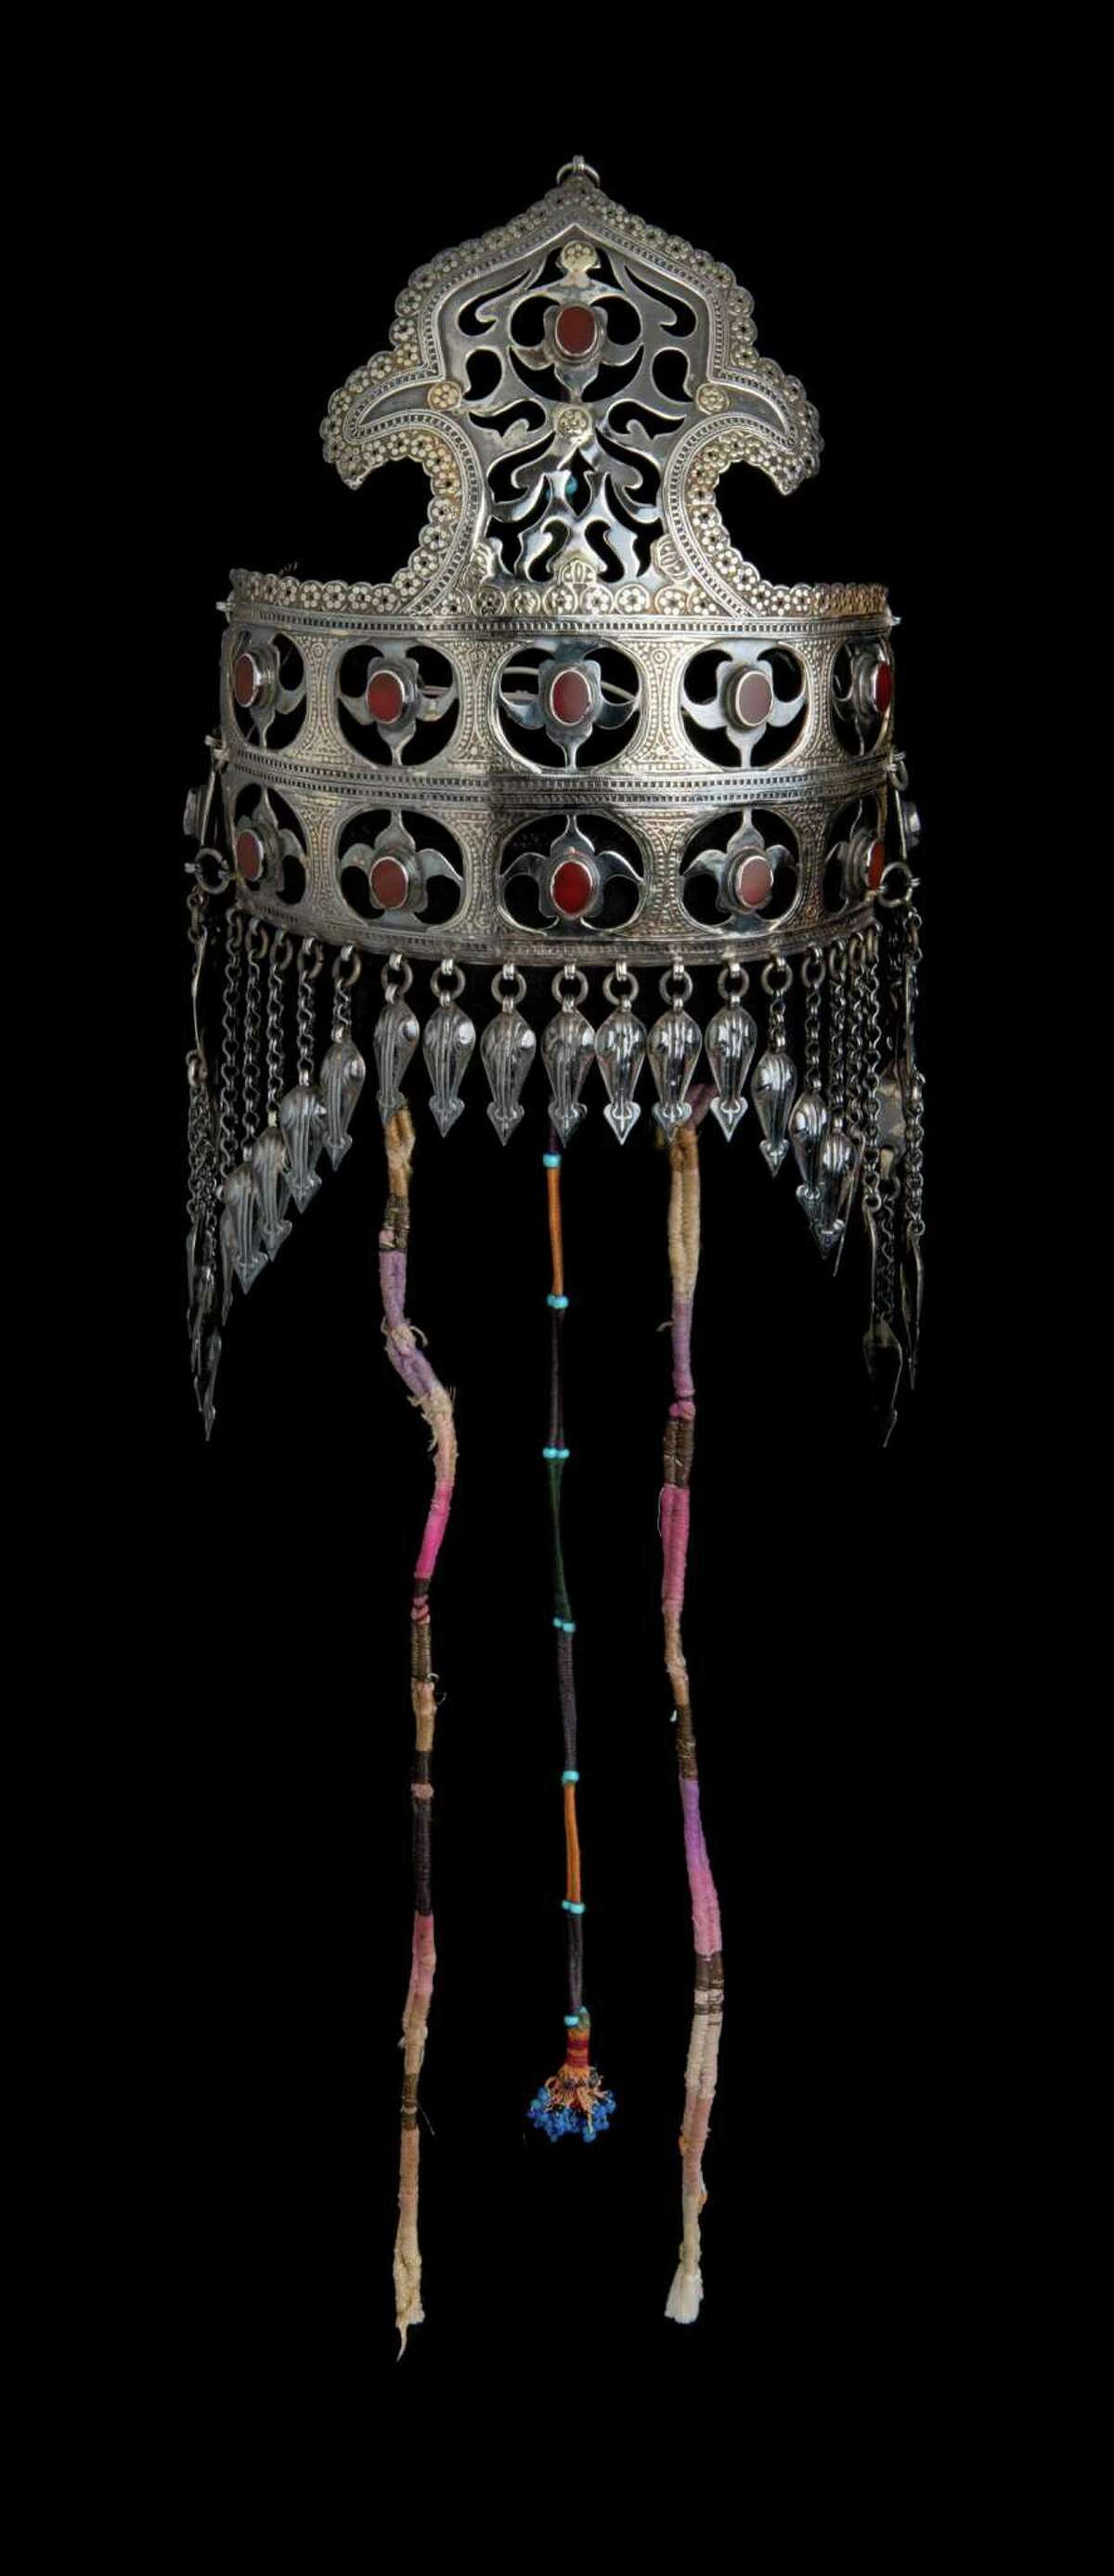 This silver headdress, or bridal diadem, was crafted in Turkmenistan. Many of the pieces on display symbolize fertility.